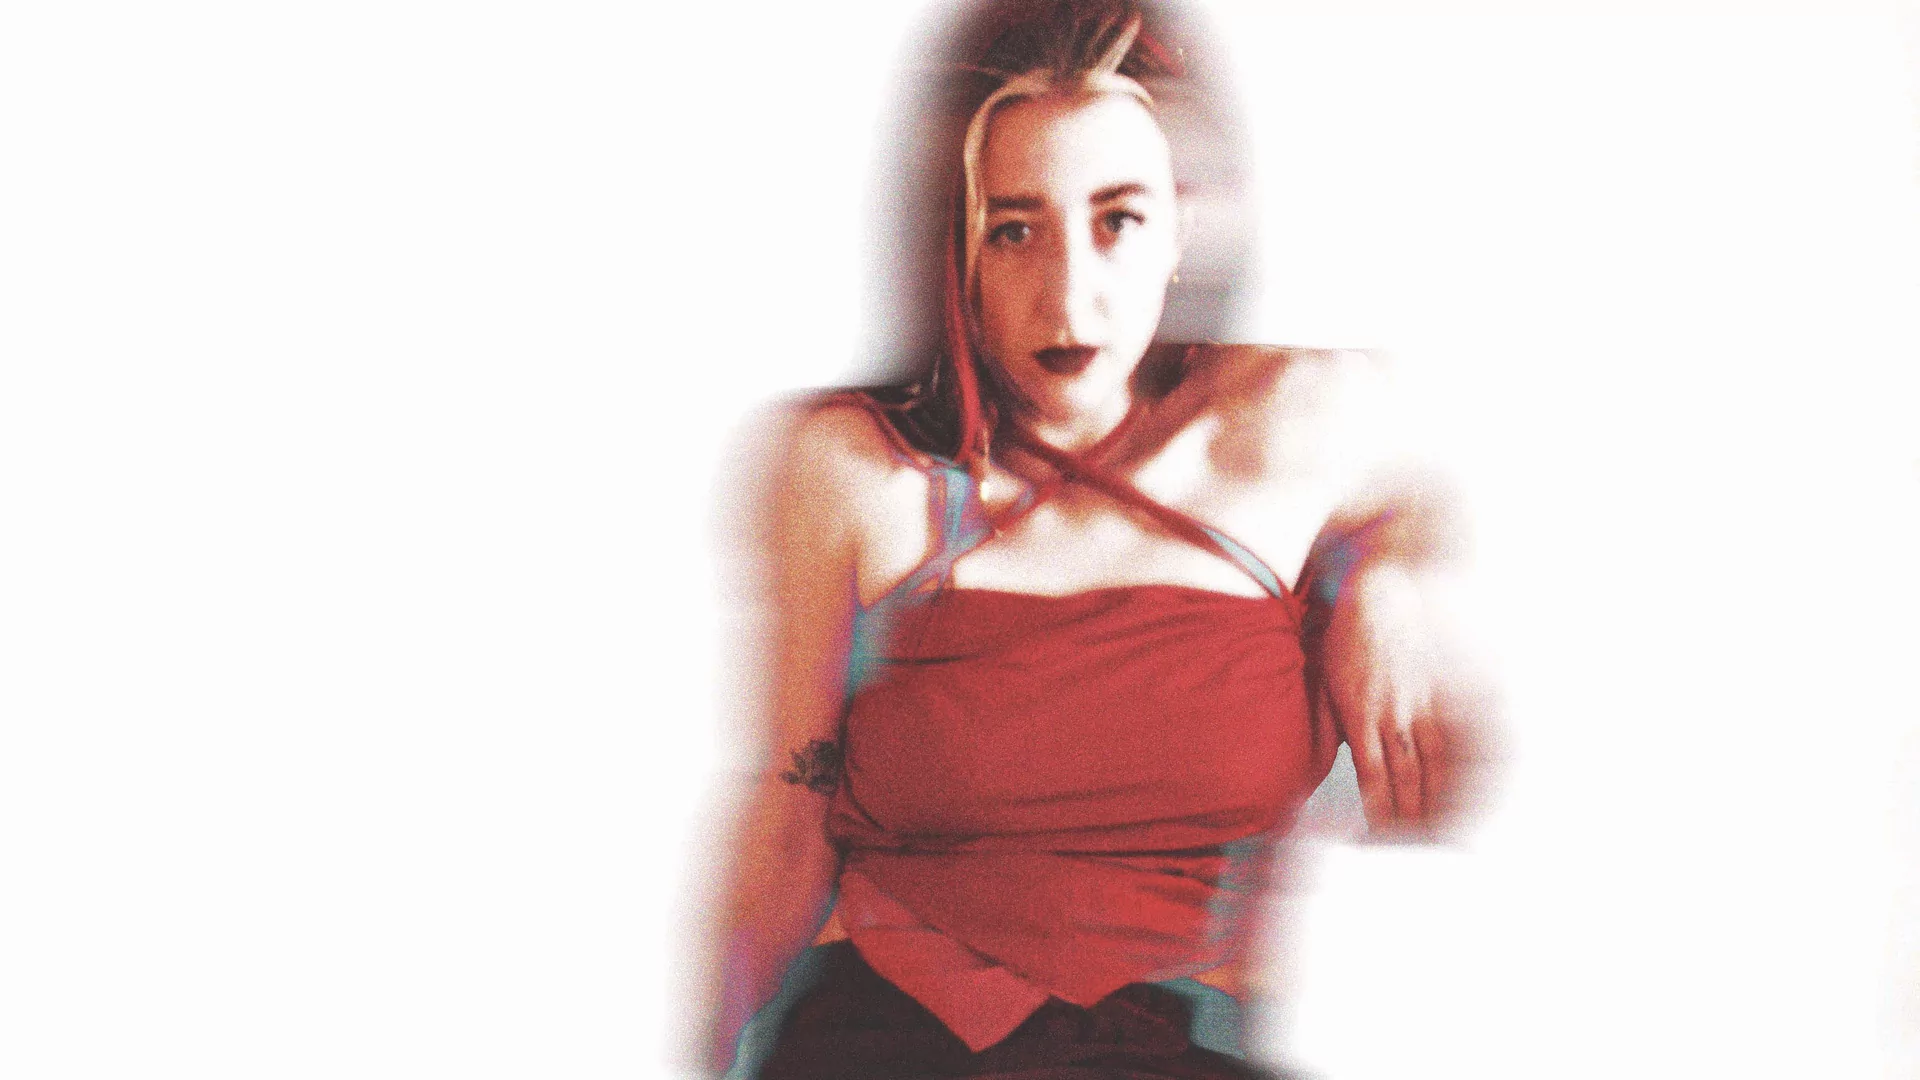 Glitchy photo of ex.sses wearing a red corset dress